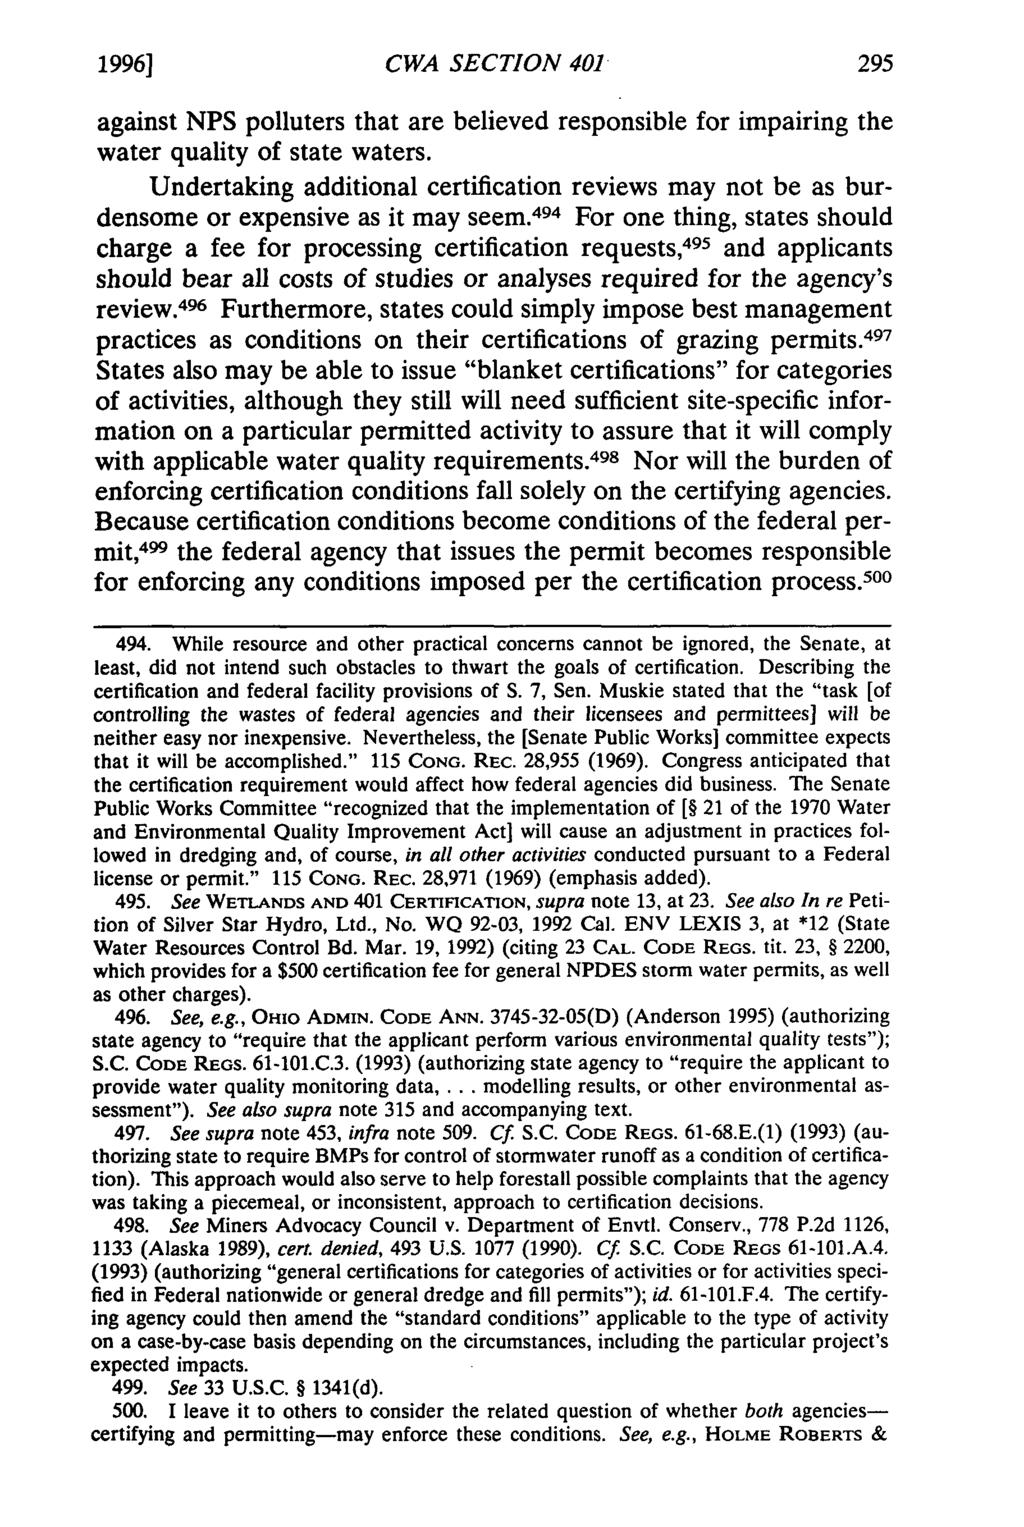 1996] CWA SECTION 401 against NPS polluters that are believed responsible for impairing the water quality of state waters.